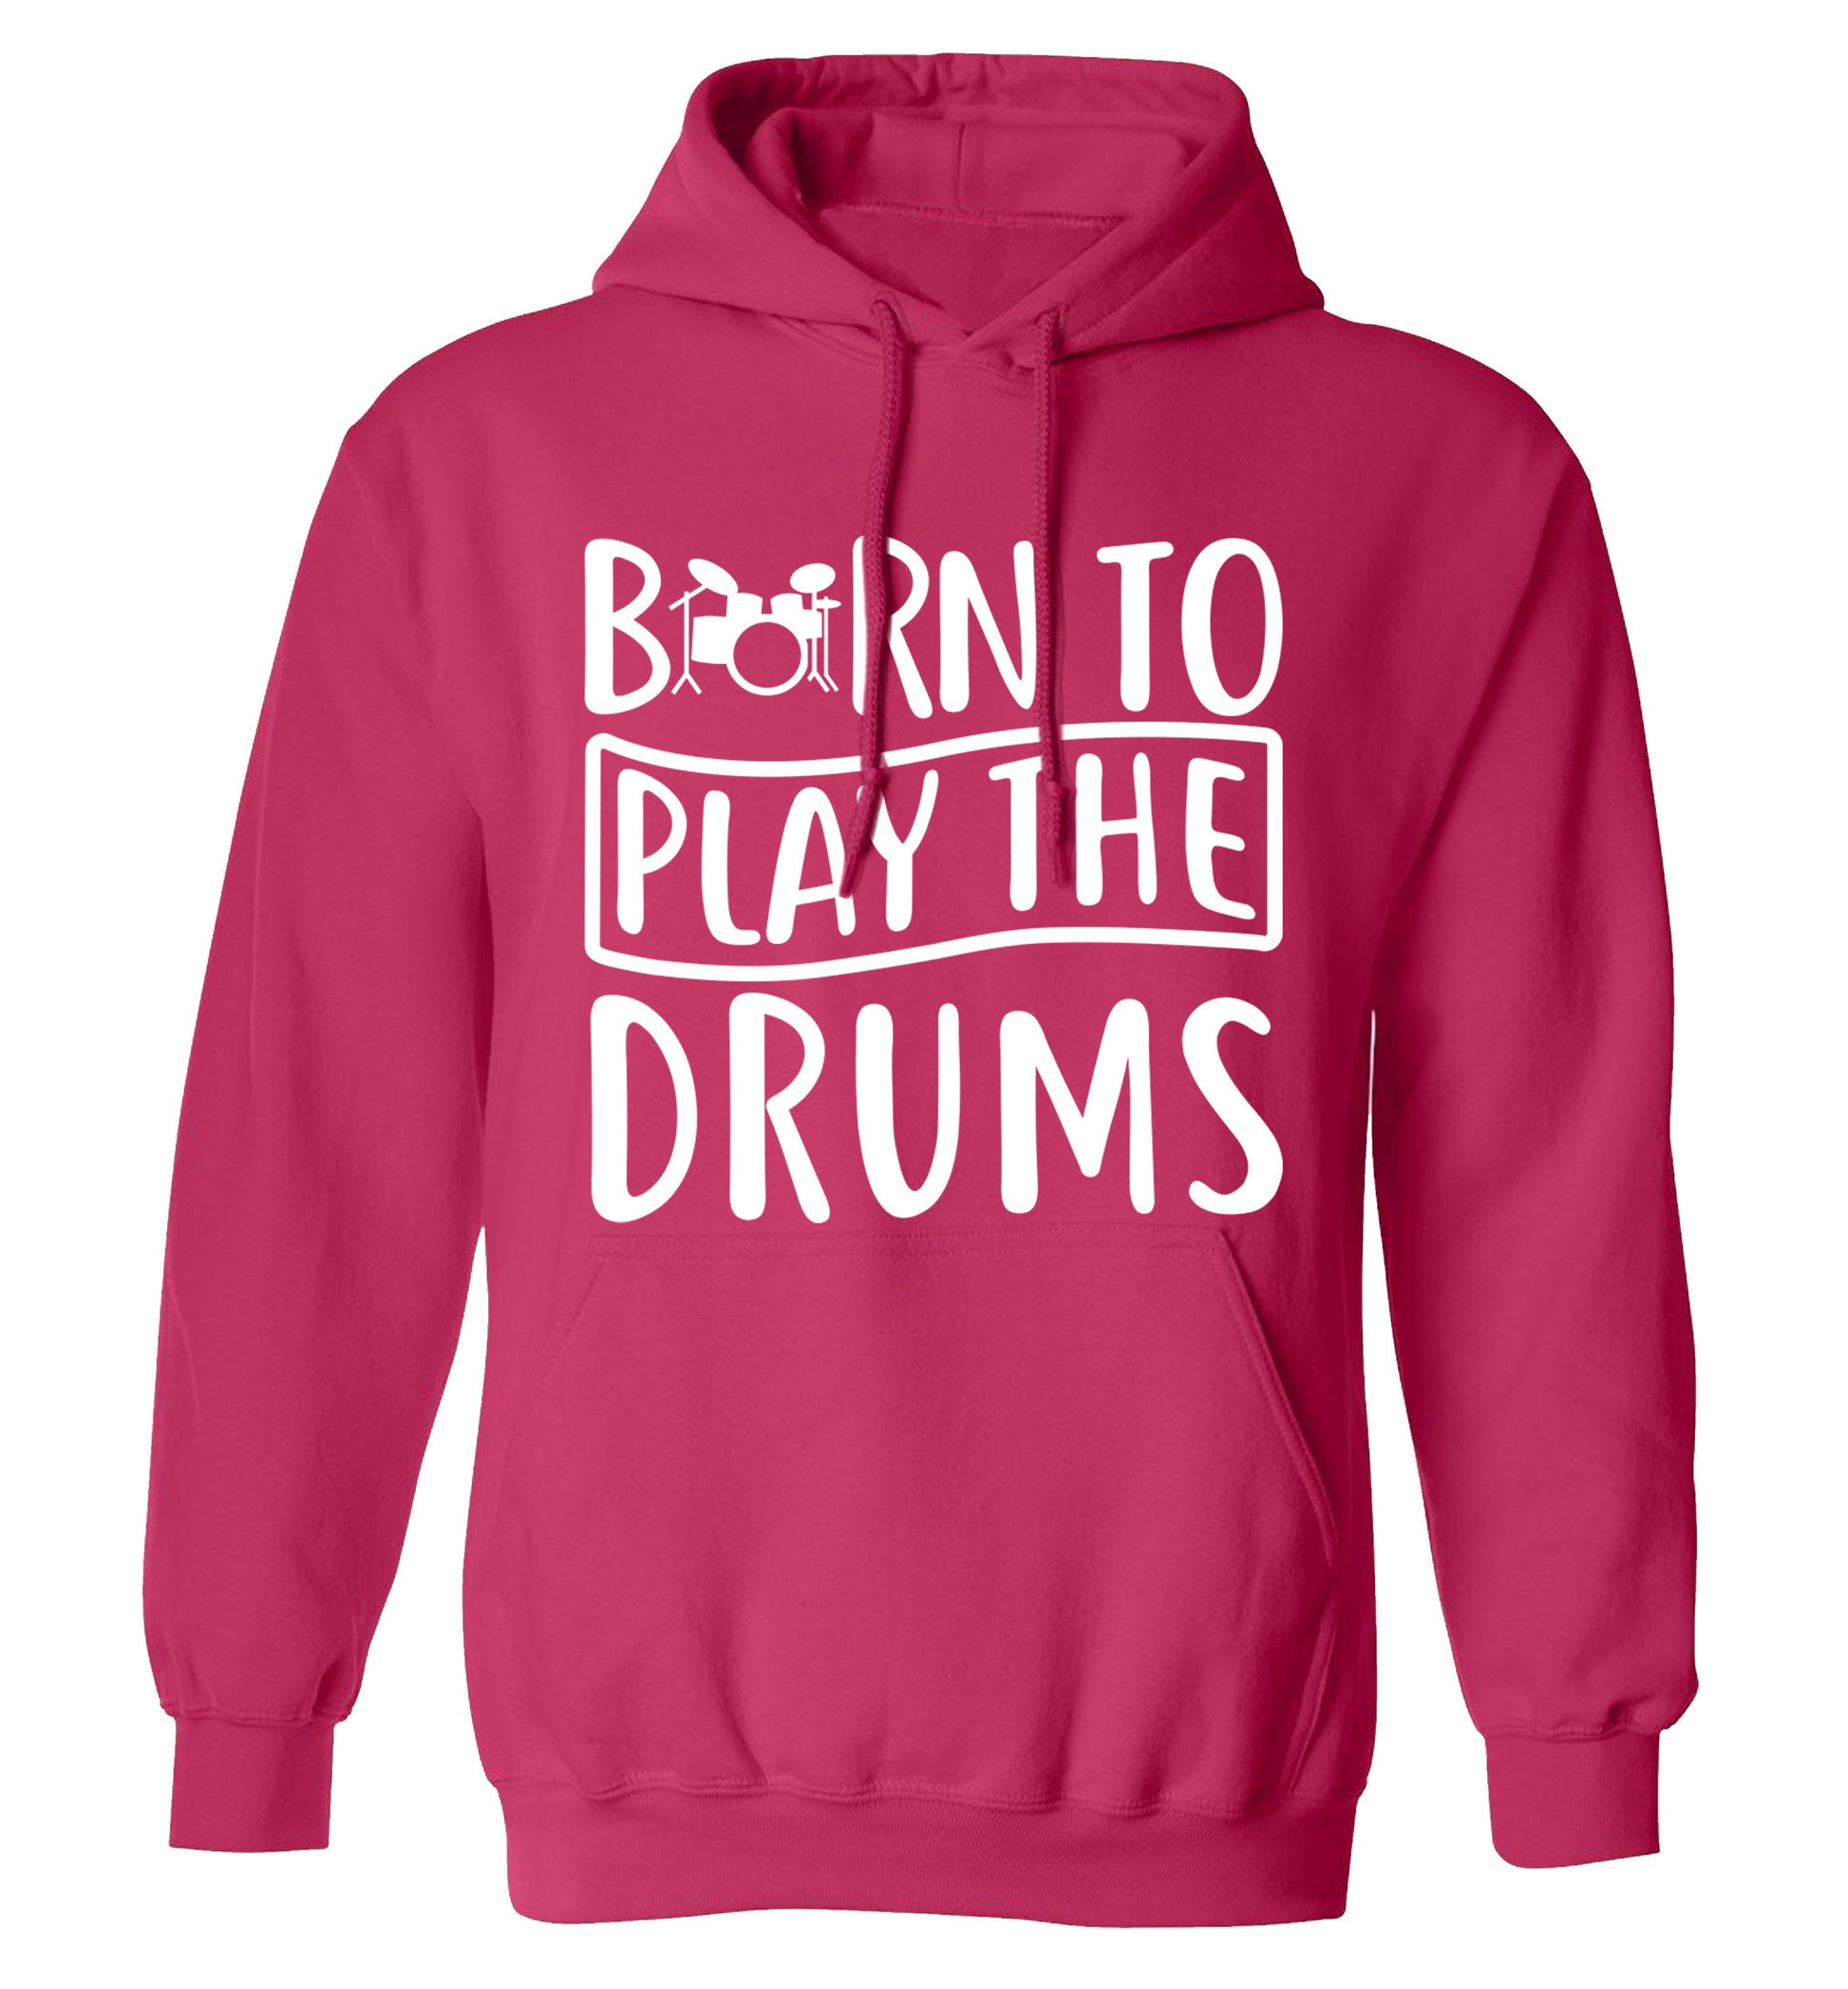 Born to play the drums adults unisex pink hoodie 2XL